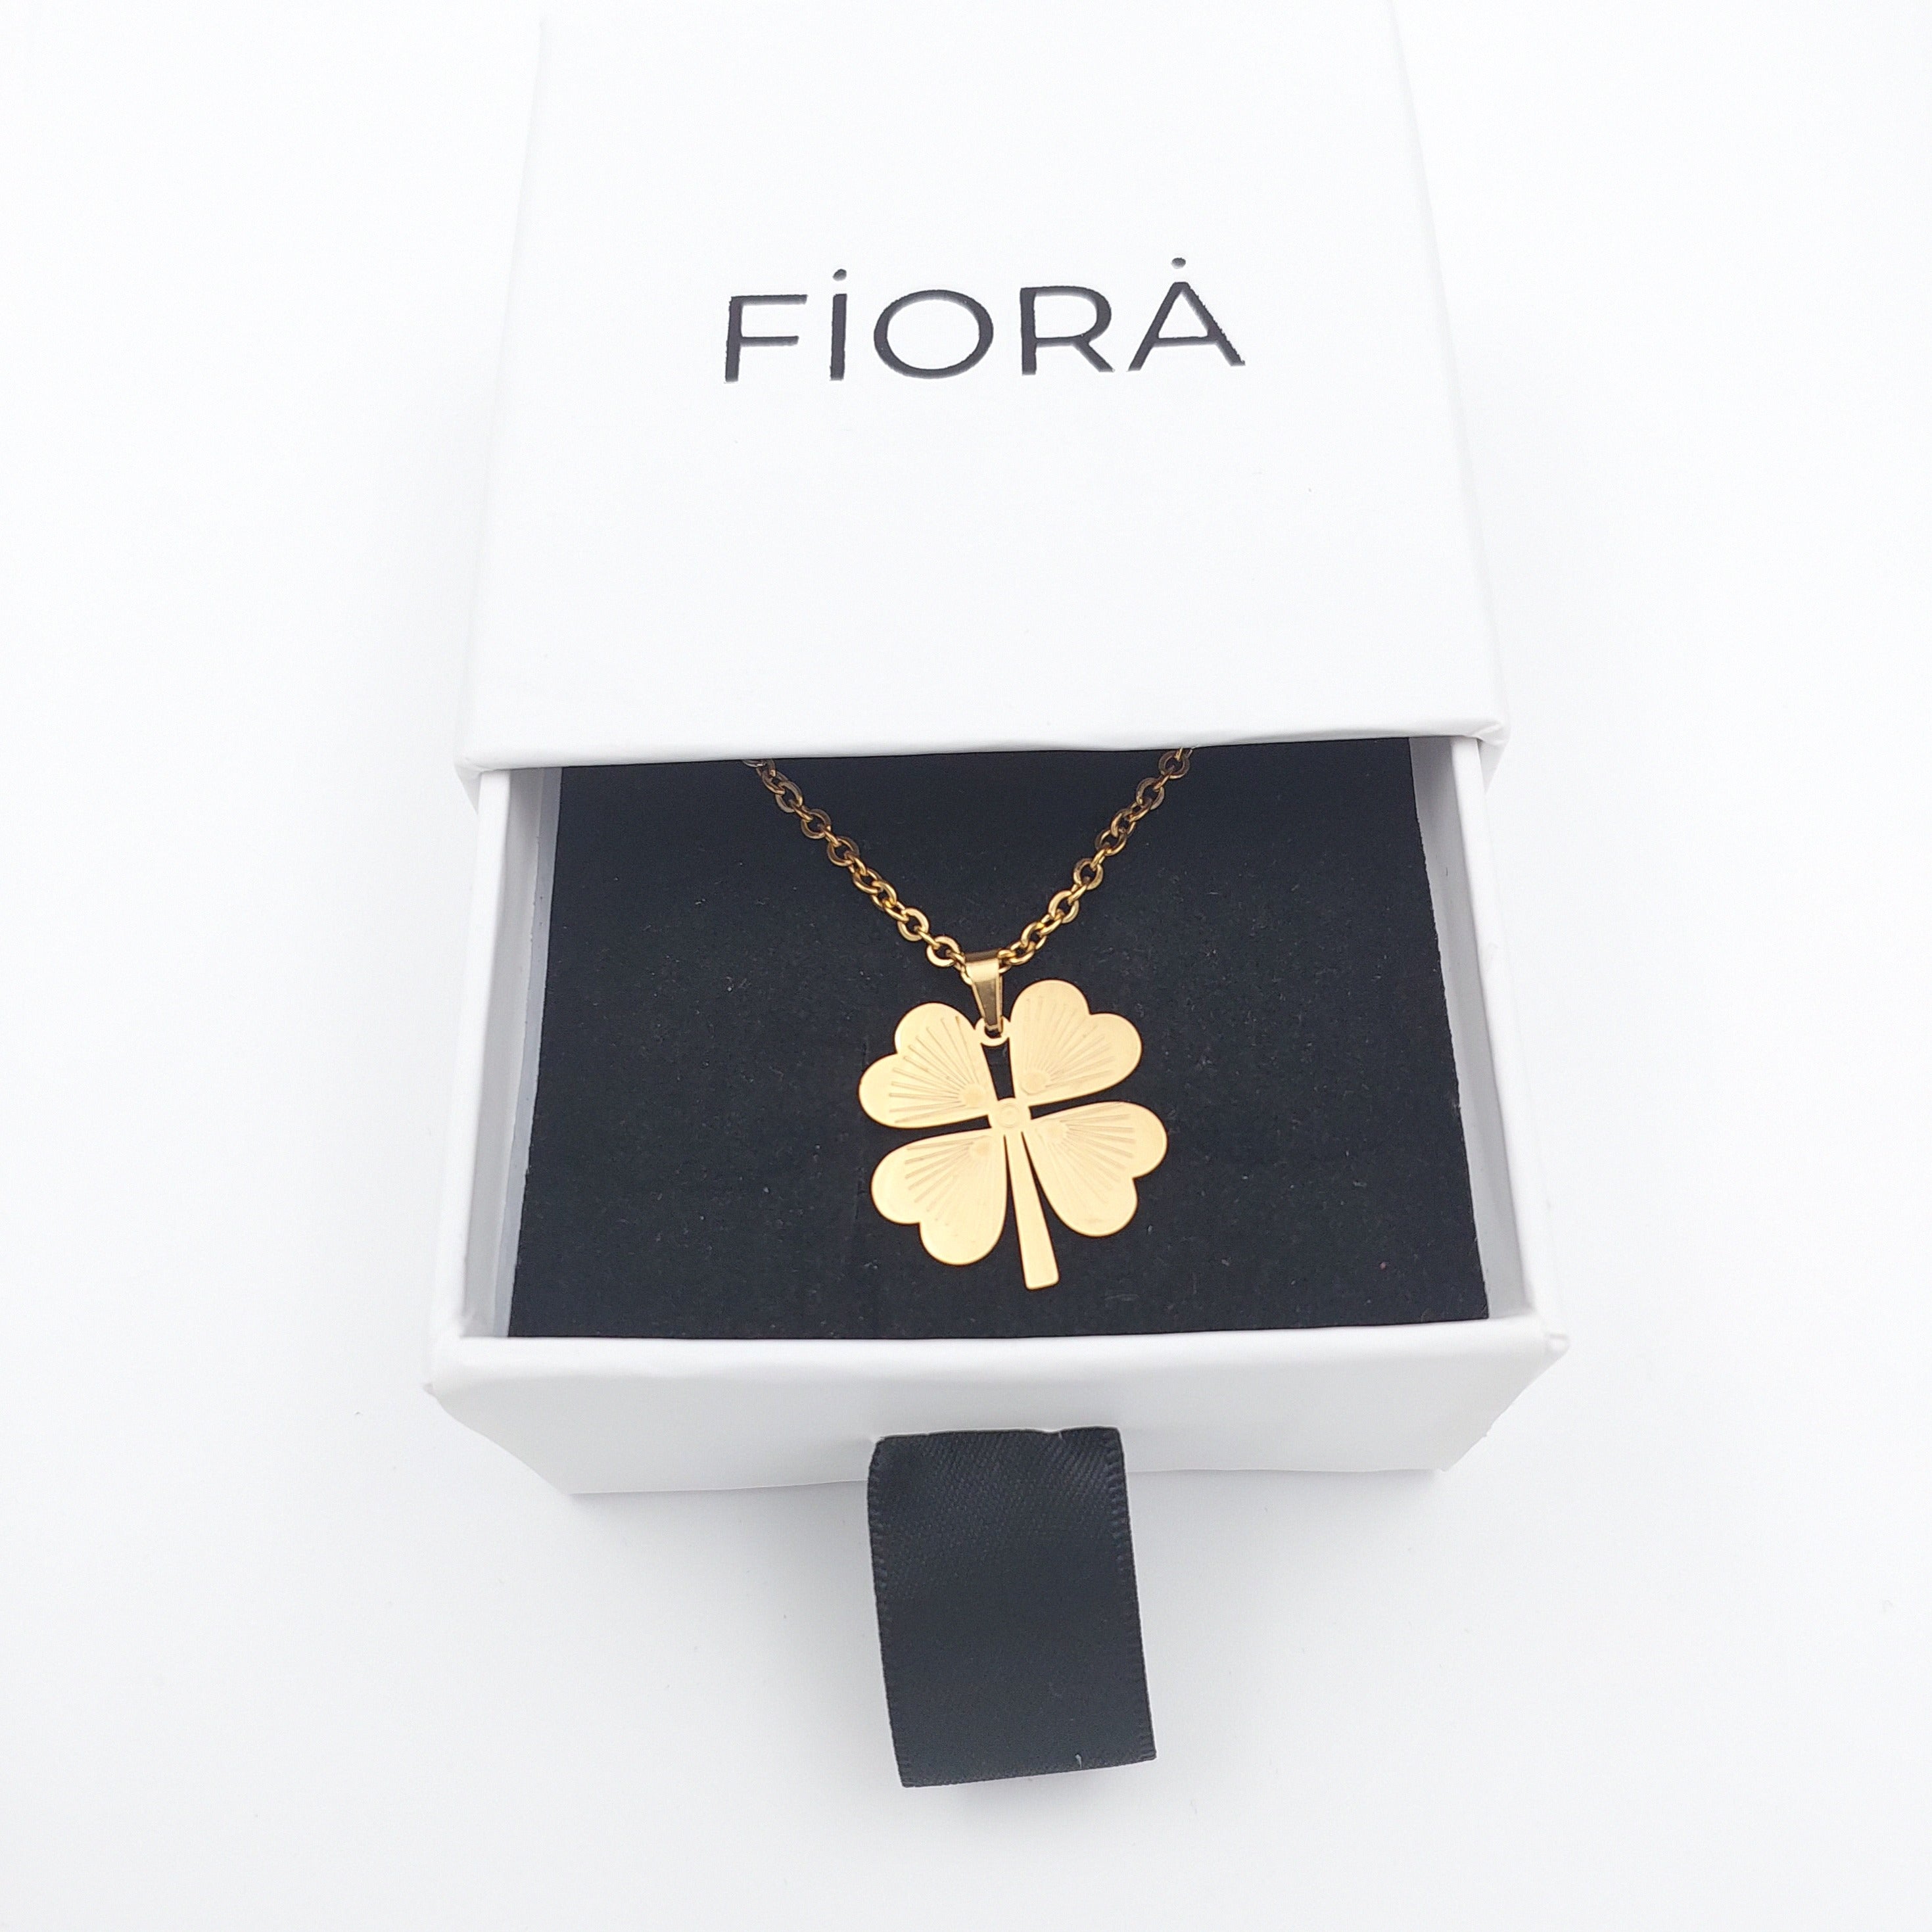 FIORA | Gold Charm | Necklace